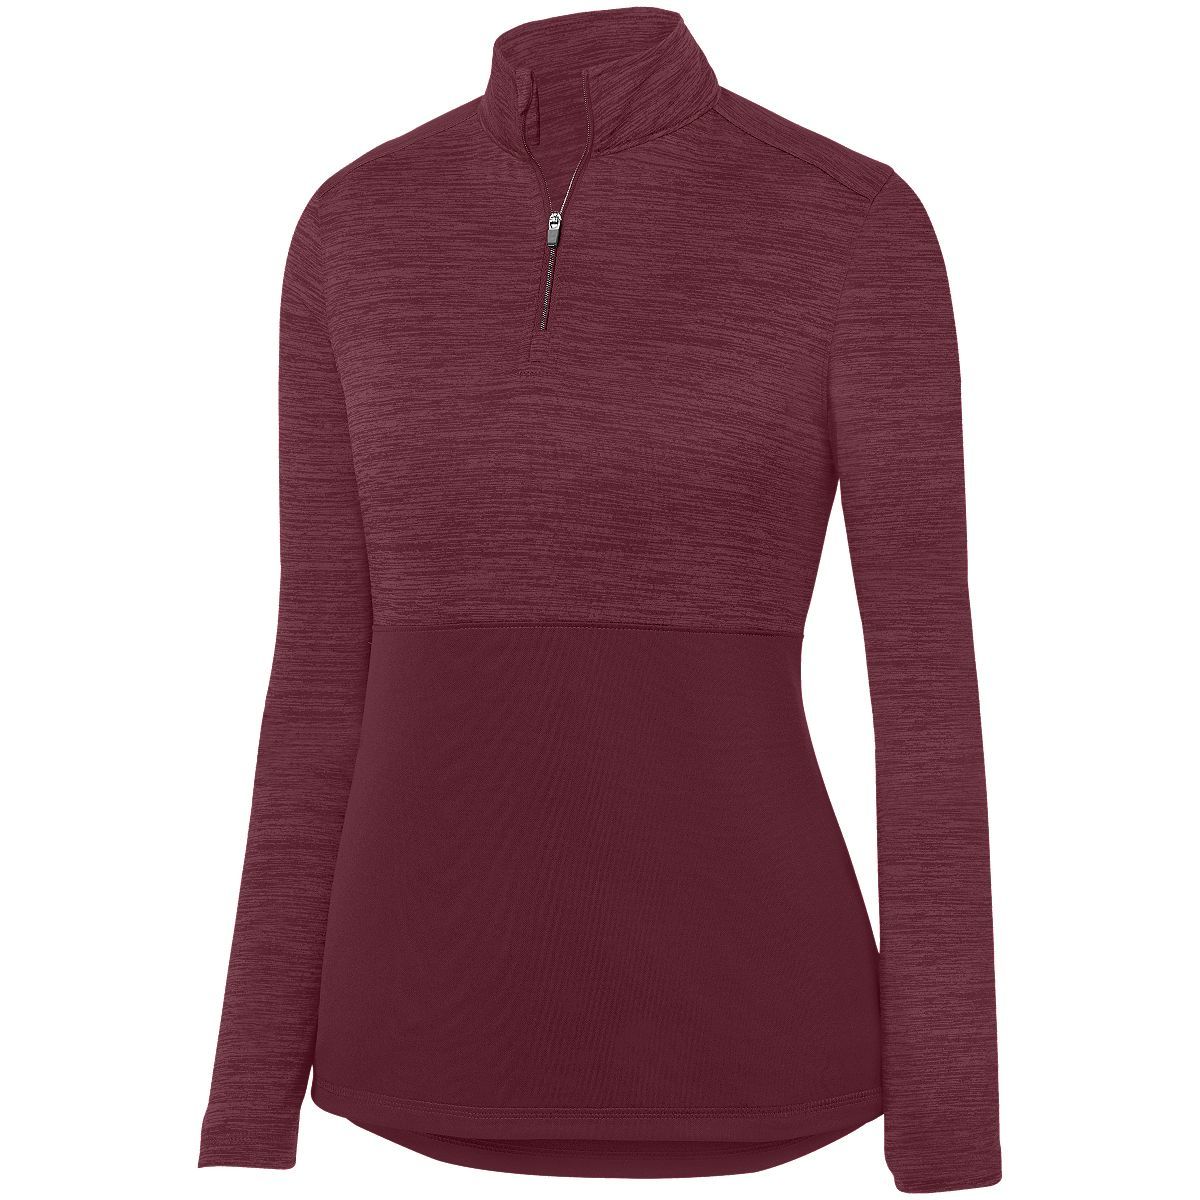 Augusta Sportswear Ladies Shadow Tonal Heather 1/4 Zip Pullover in Maroon  -Part of the Ladies, Ladies-Pullover, Augusta-Products, Outerwear, Tonal-Fleece-Collection product lines at KanaleyCreations.com